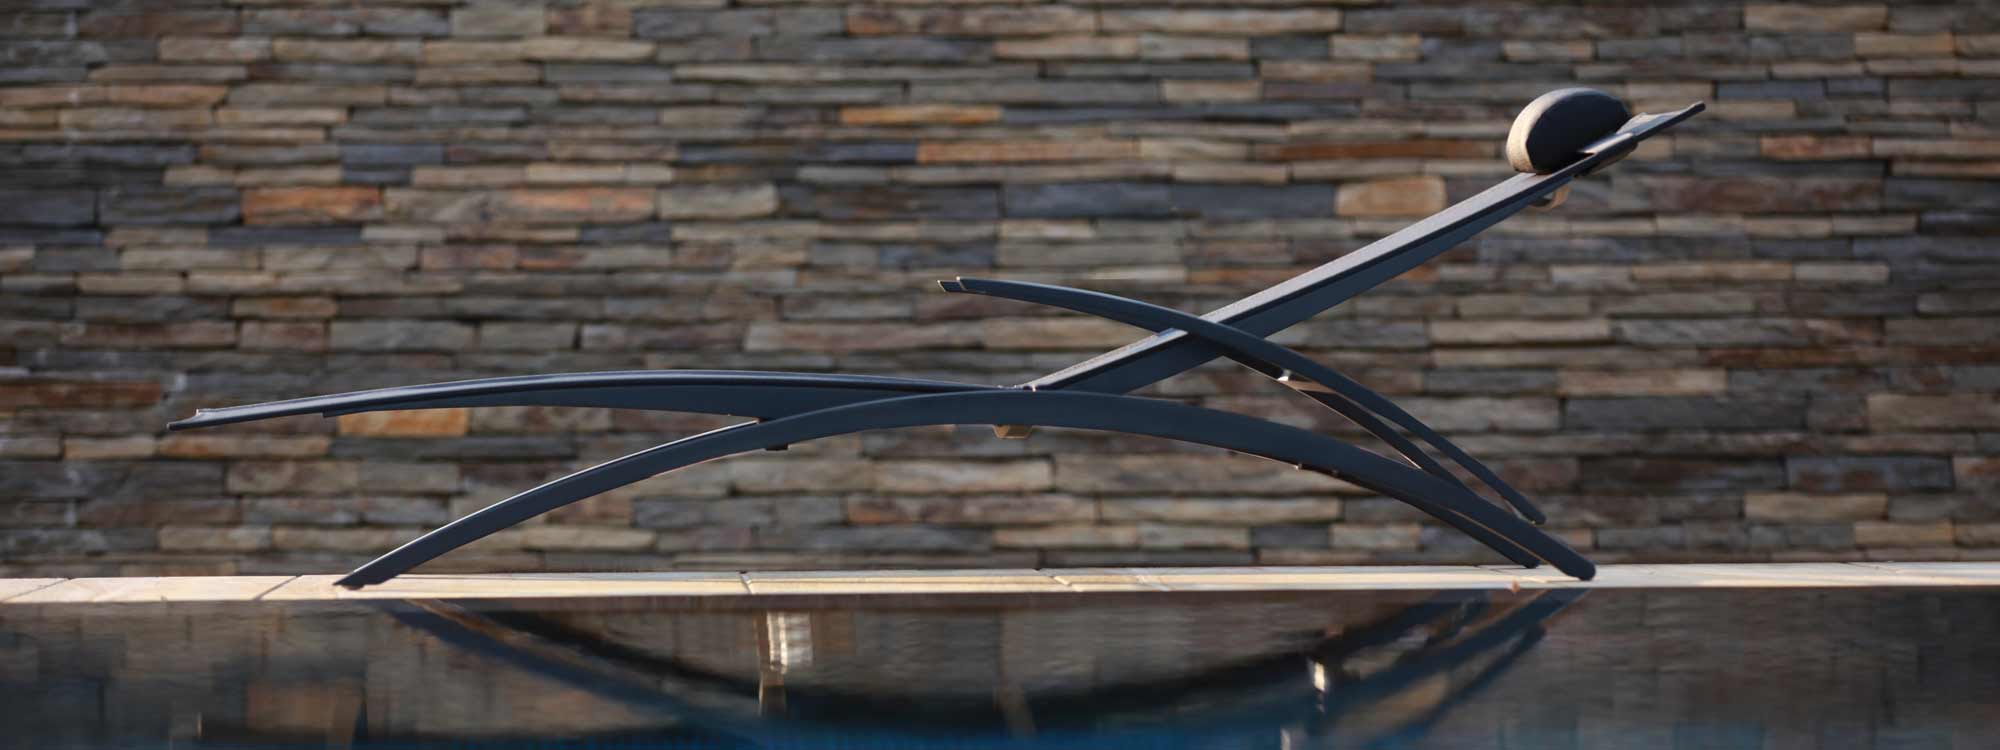 OZN 195T modern garden sun lounger is a quality adjustable sun bed in all weather sun bed materials by Royal Botania